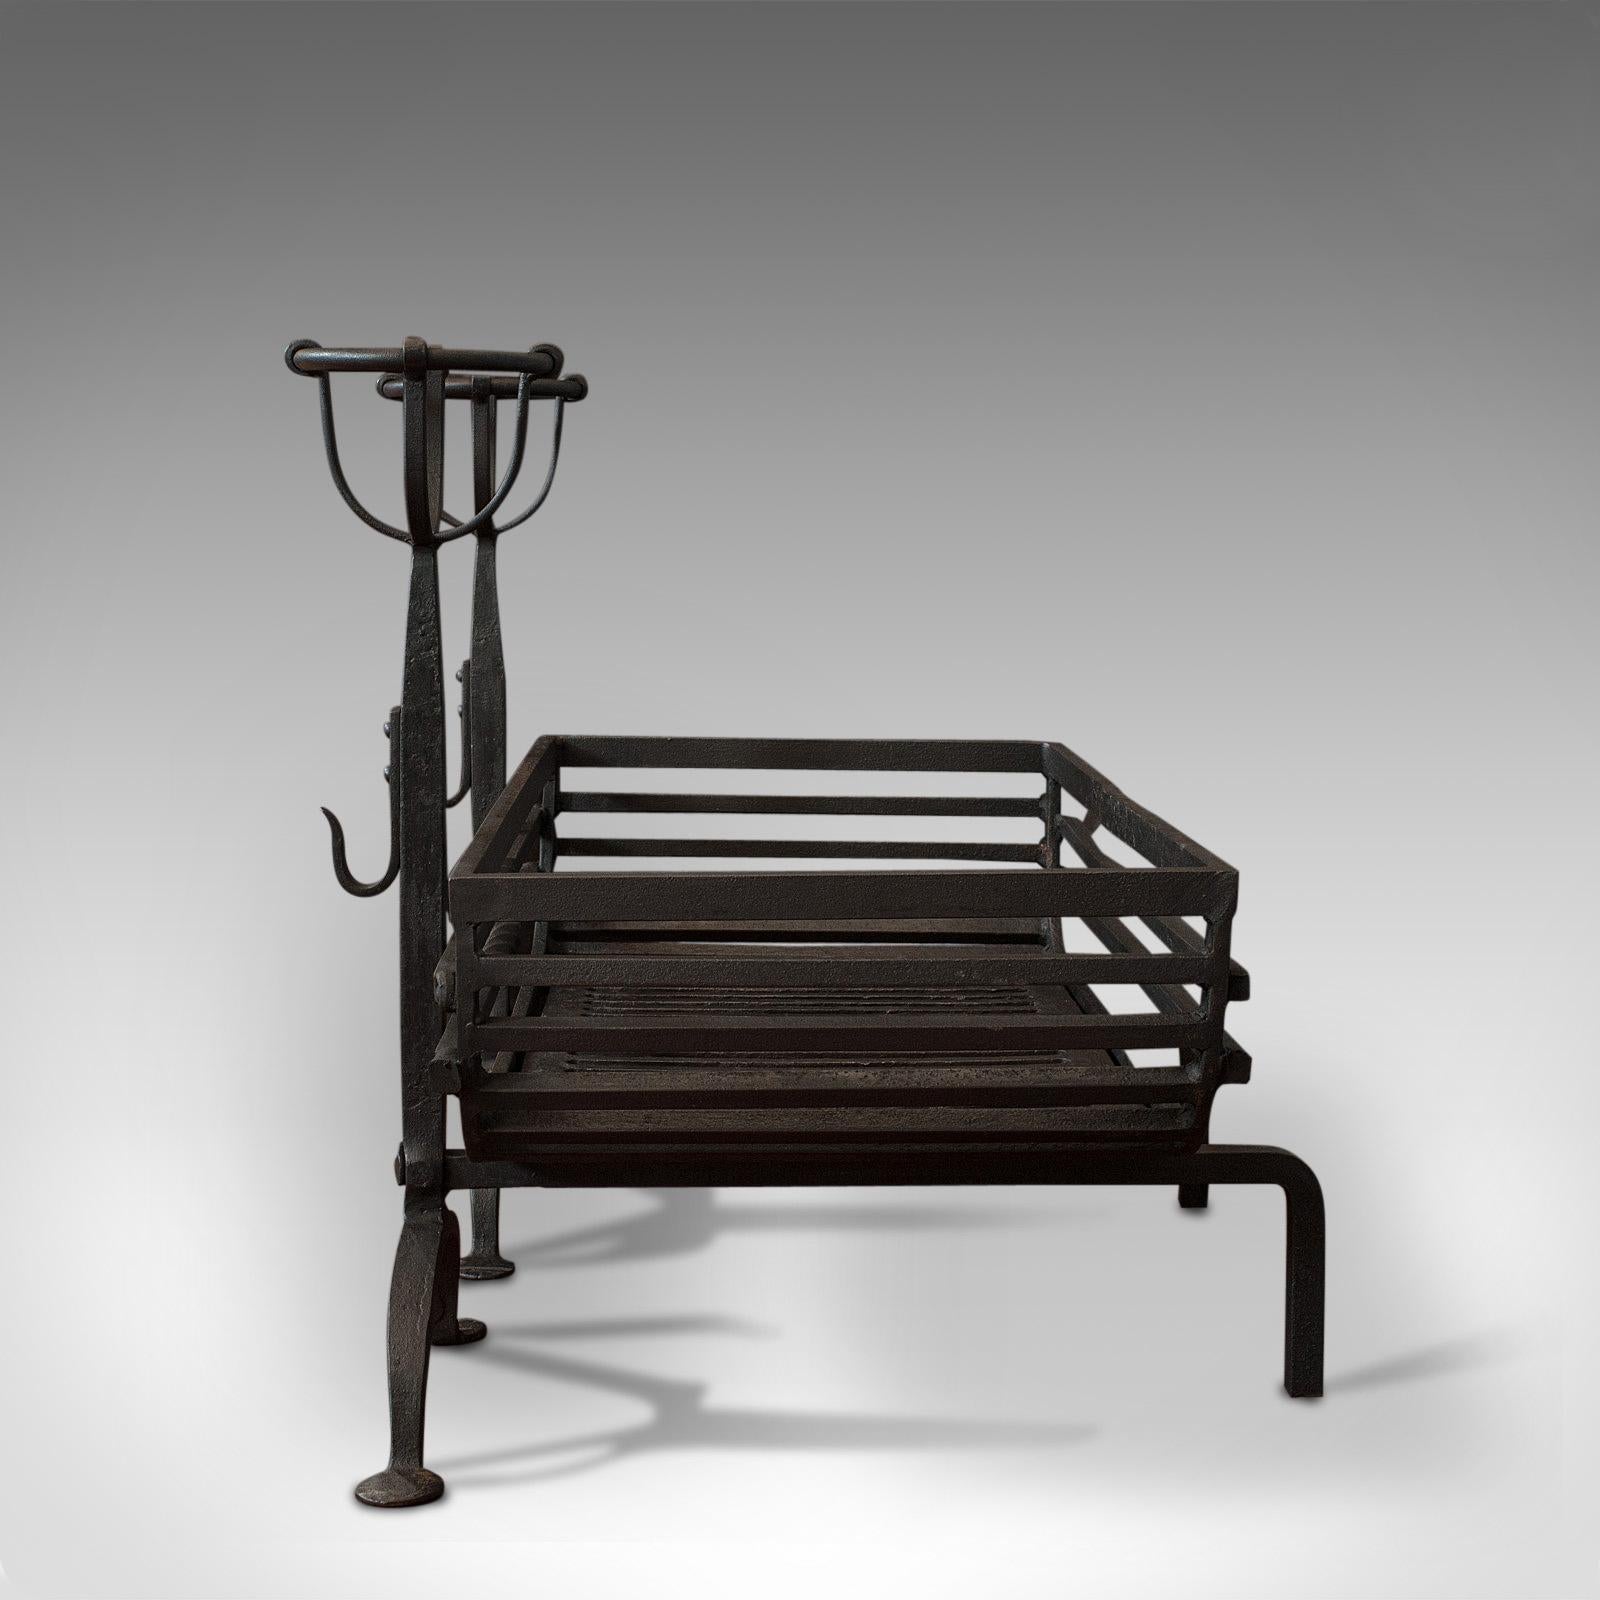 20th Century Antique Fire Basket, Pair of Andirons, English, Iron, Fireside, Victorian, 1900